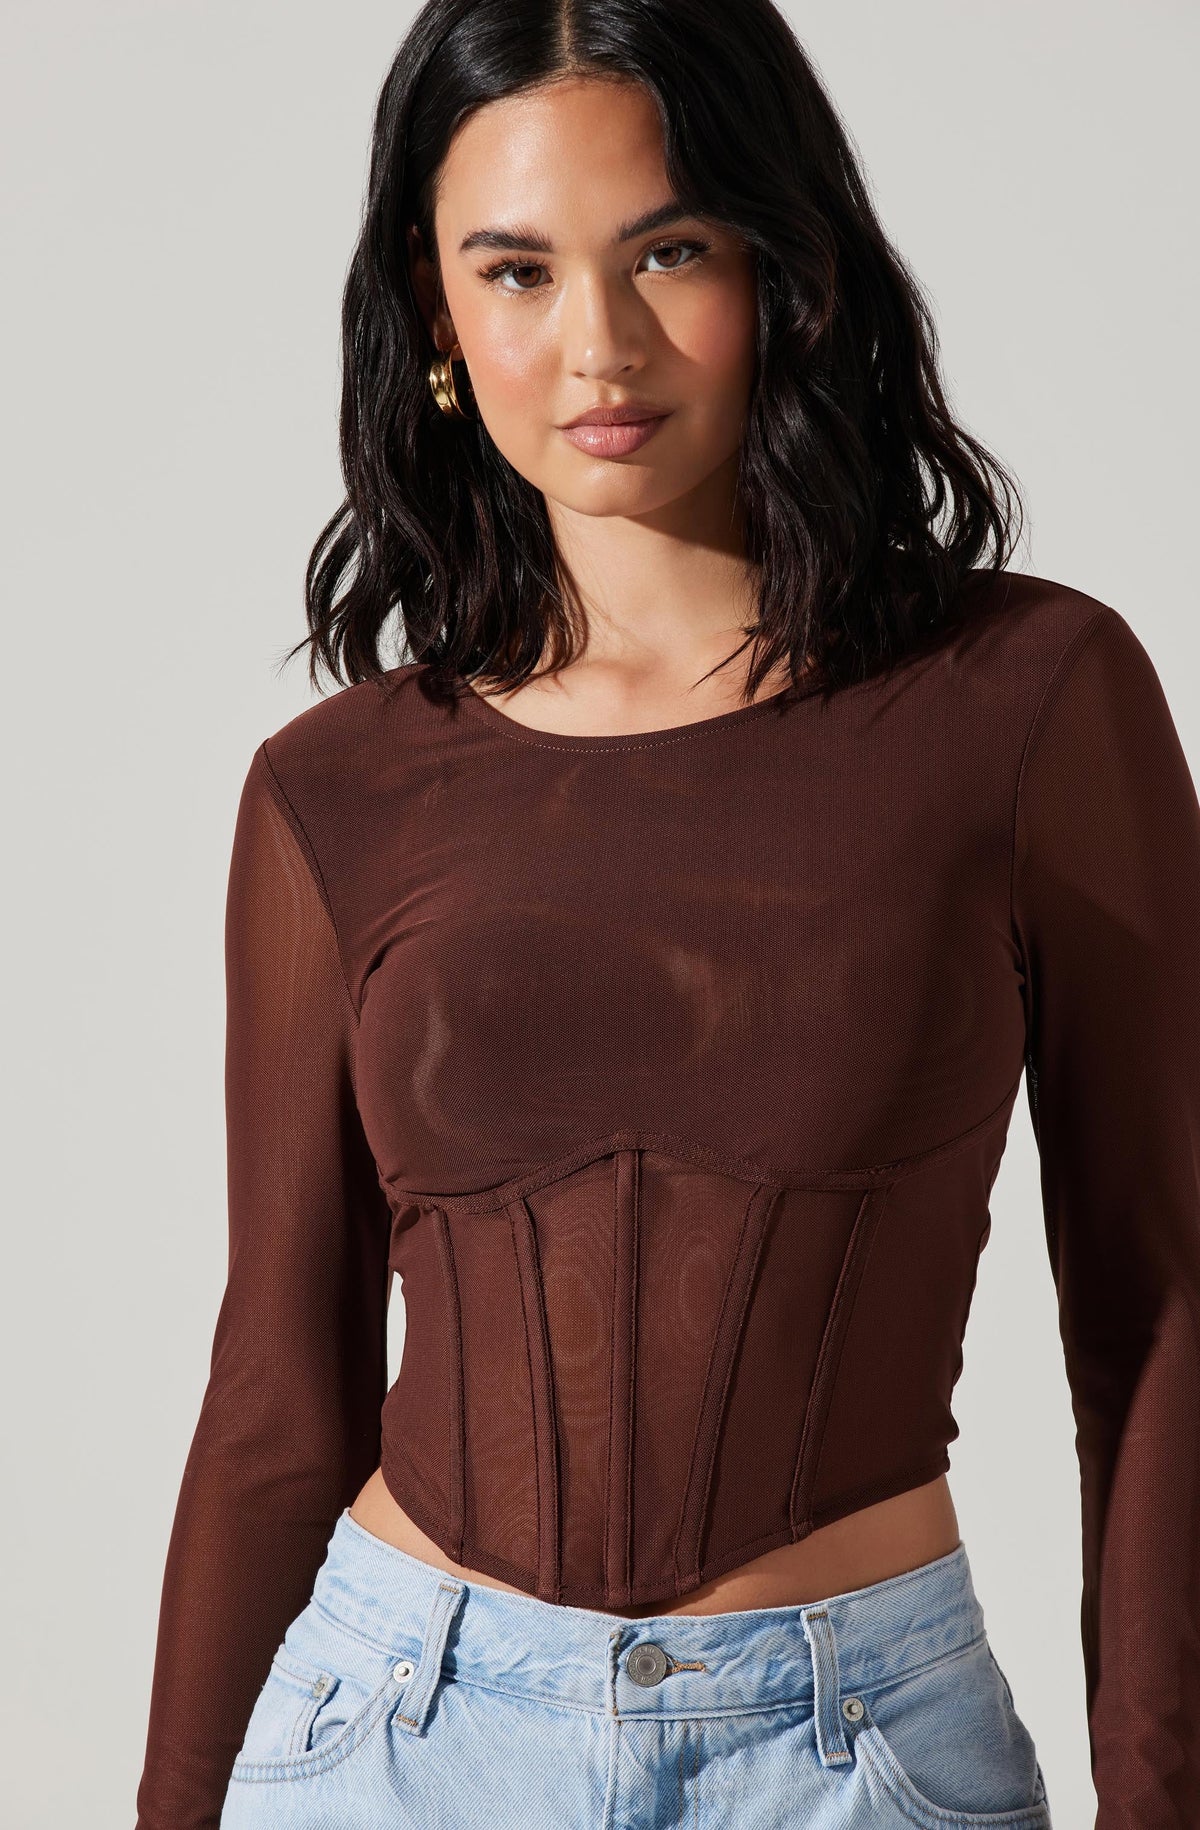 Mesh Feather Corset Long Sleeve Top – Fanxity